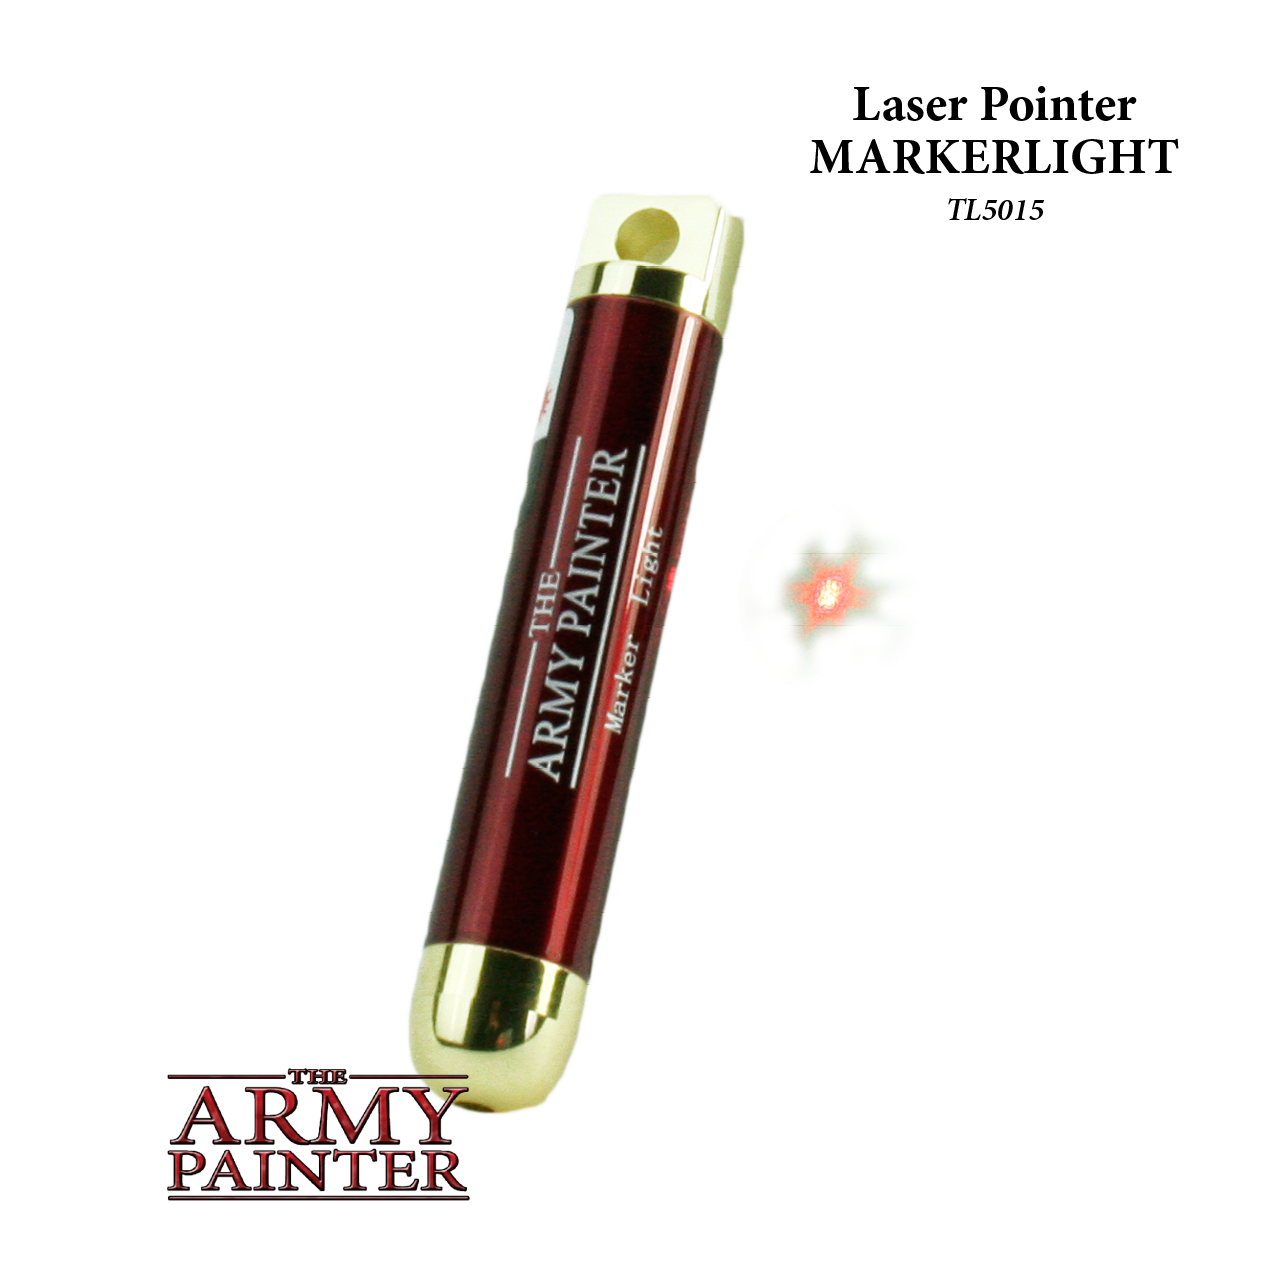 Laser Pointer - Army Painter Tools